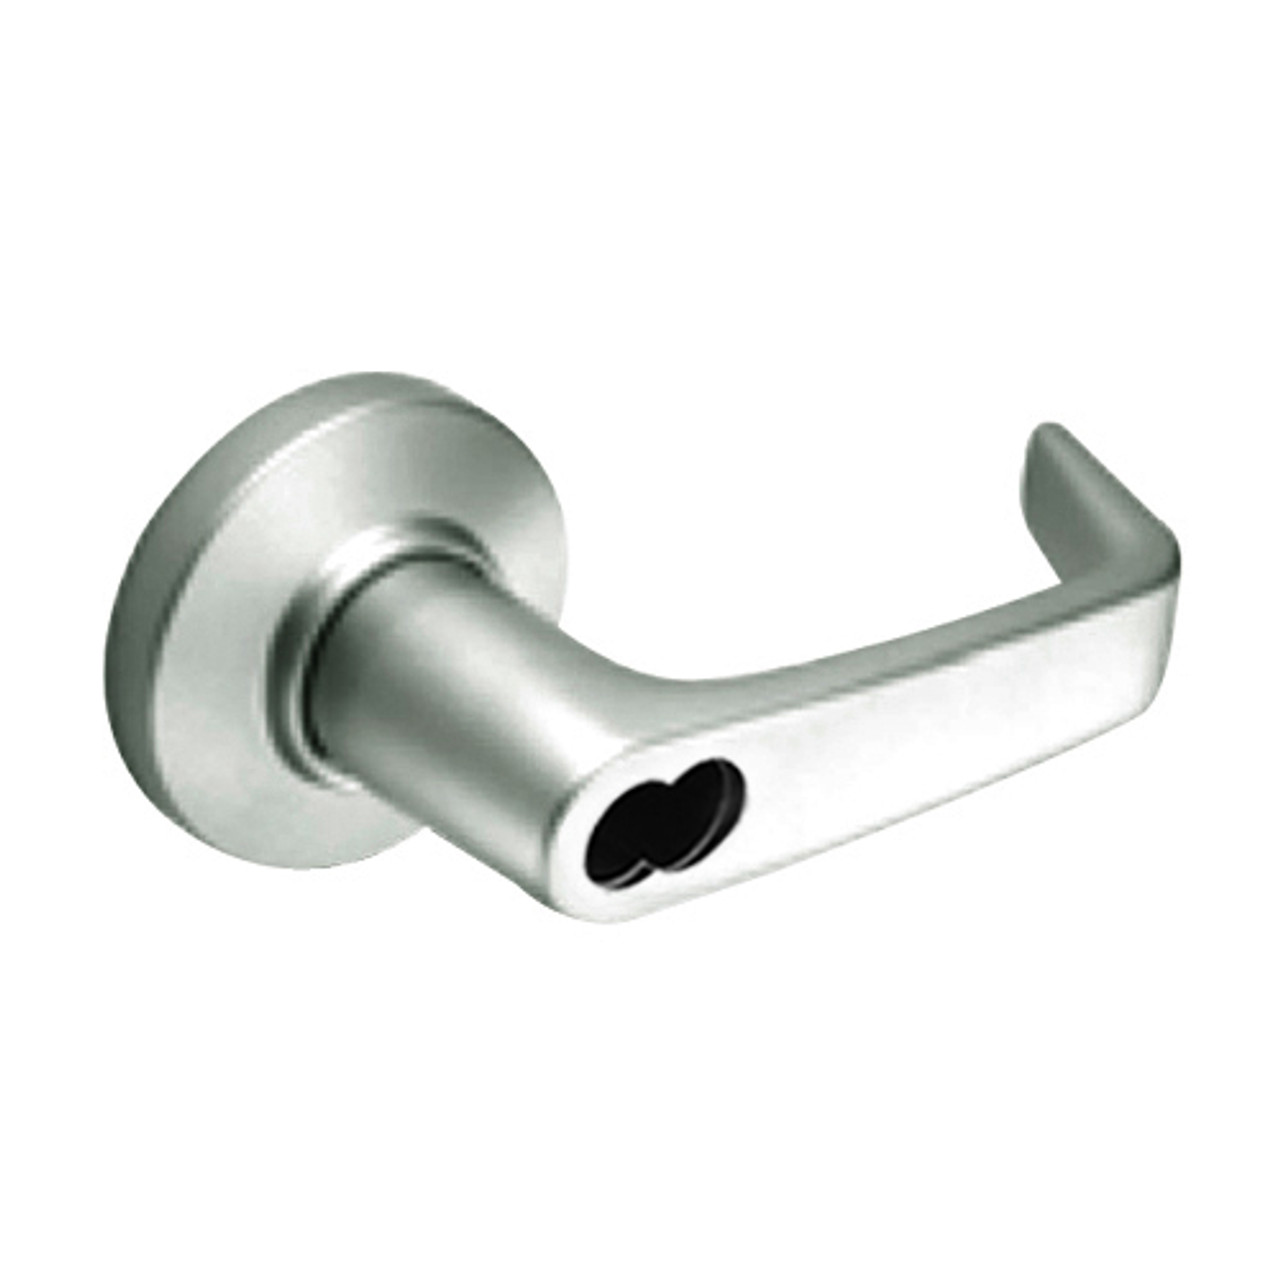 9K37A15CS3619 Best 9K Series Dormitory or Storeroom Cylindrical Lever Locks with Contour Angle with Return Lever Design Accept 7 Pin Best Core in Satin Nickel